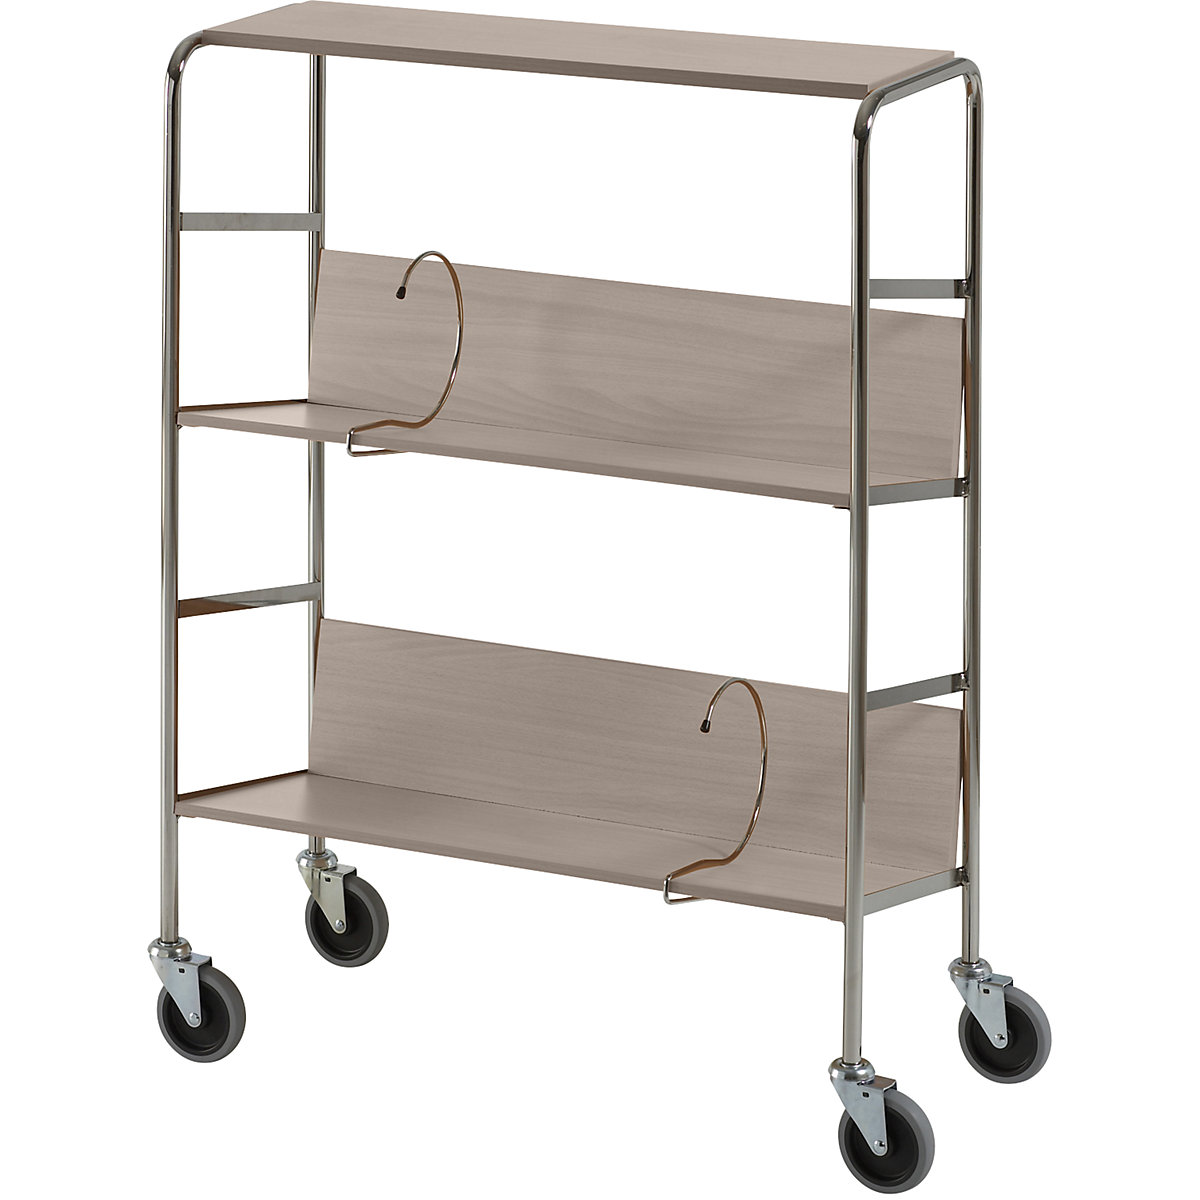 File trolley with top shelf, chrome plated – HelgeNyberg, 3 shelves, LxWxH 800 x 340 x 1060 mm, birch finish, 5+ items-11